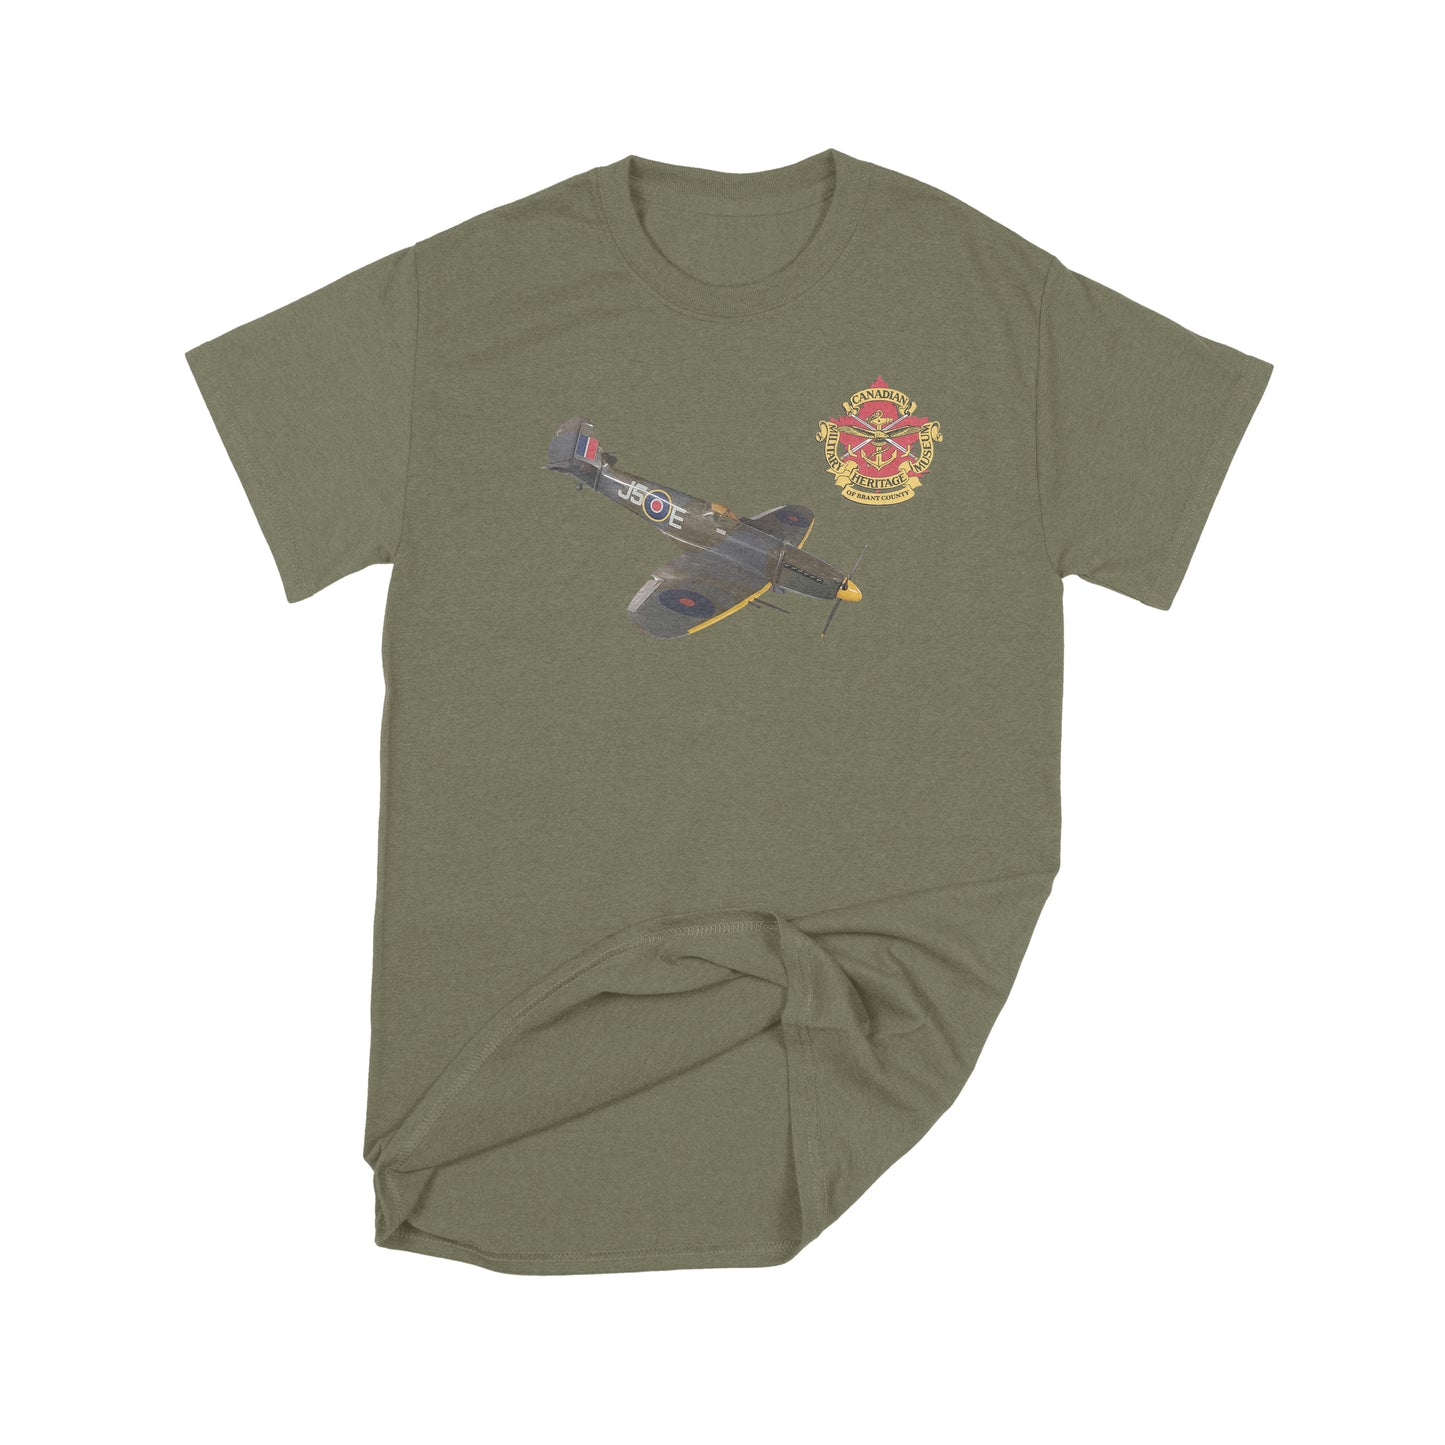 Brantford, Canadian Military Heritage Museum, Fat Dave, Museum, Spitfire, T-Shirt, Green